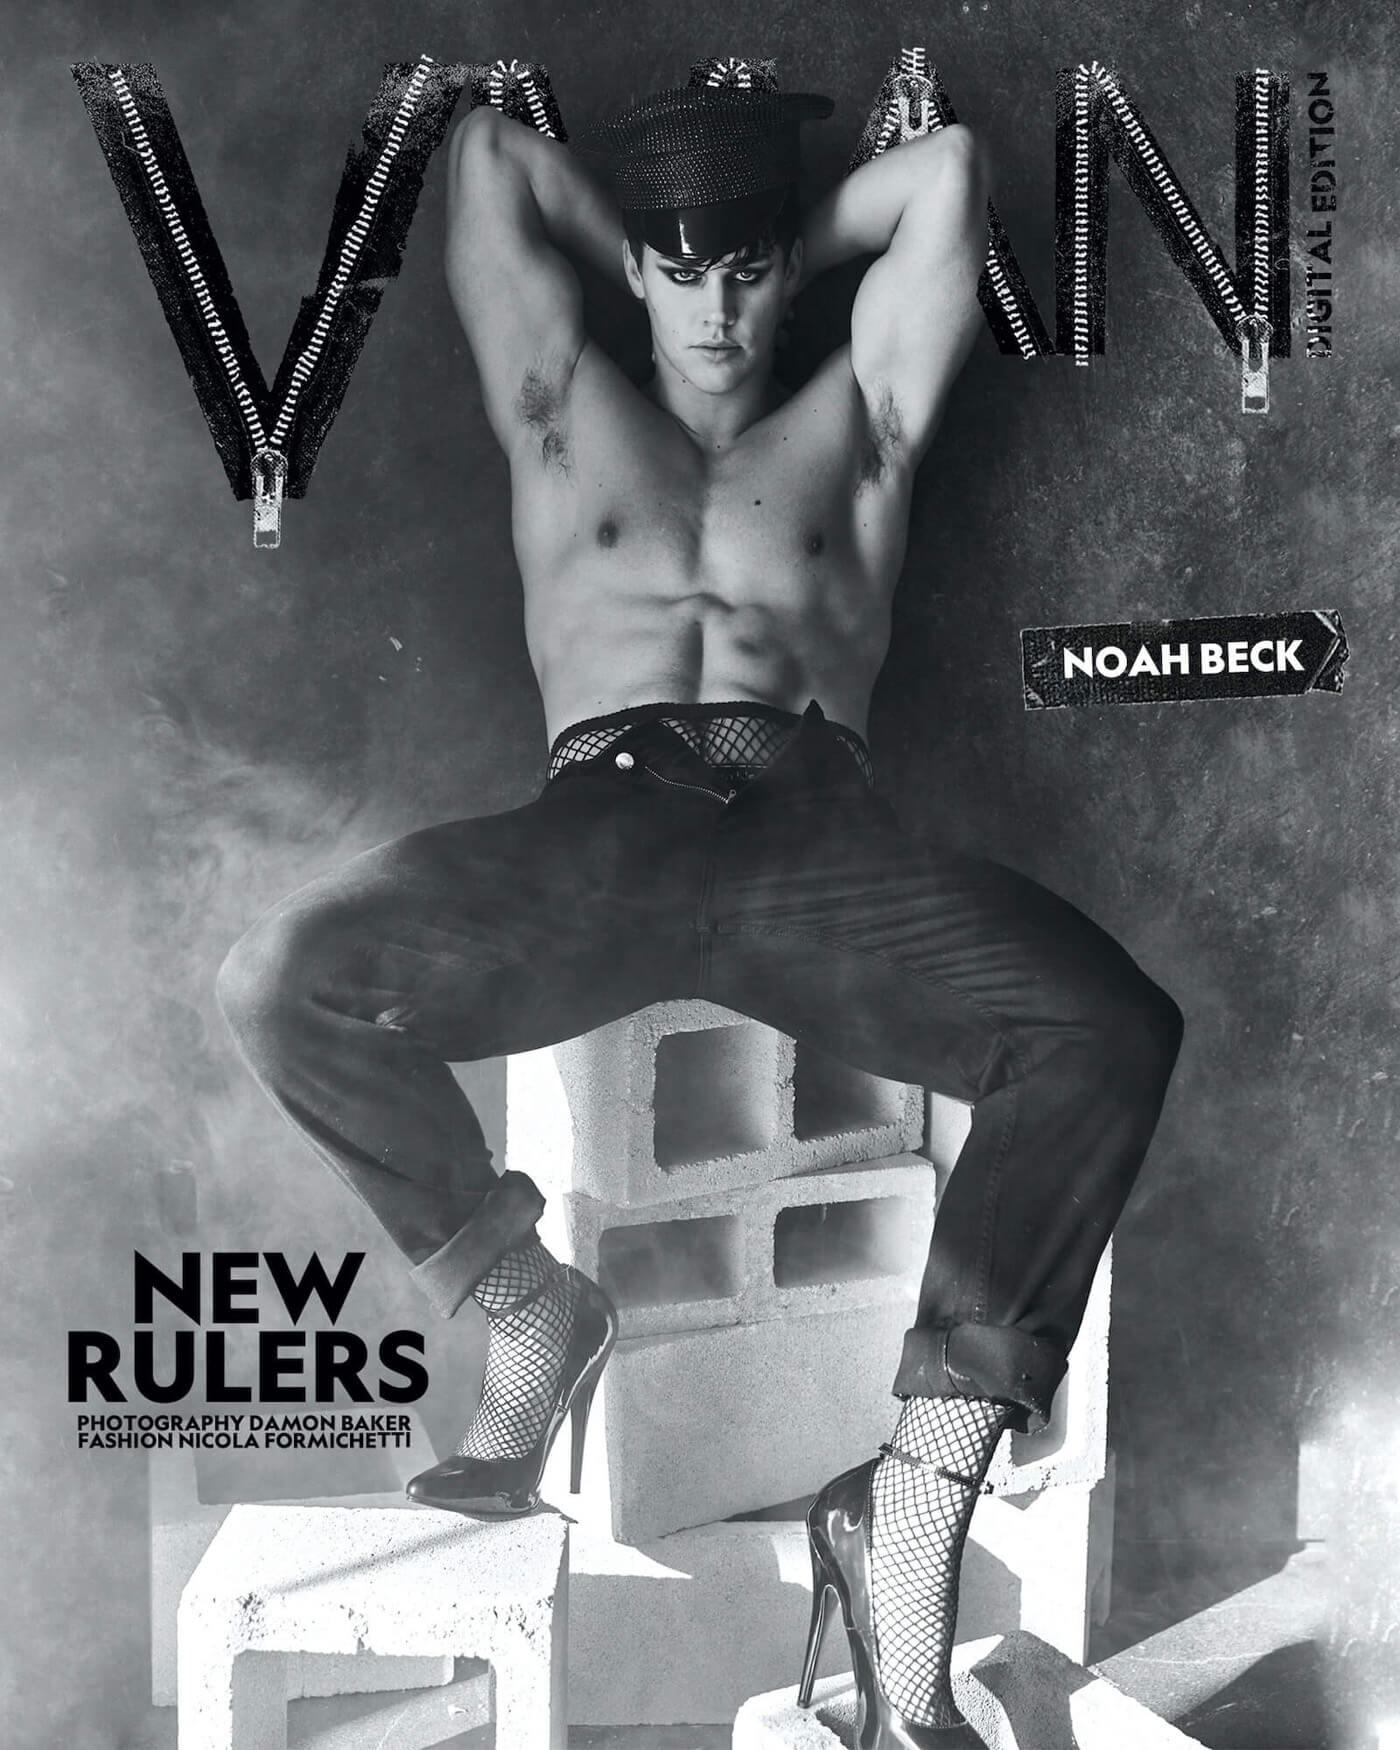 Noah Beck for VMAN 2021 Digital Issue 'New Rulers'